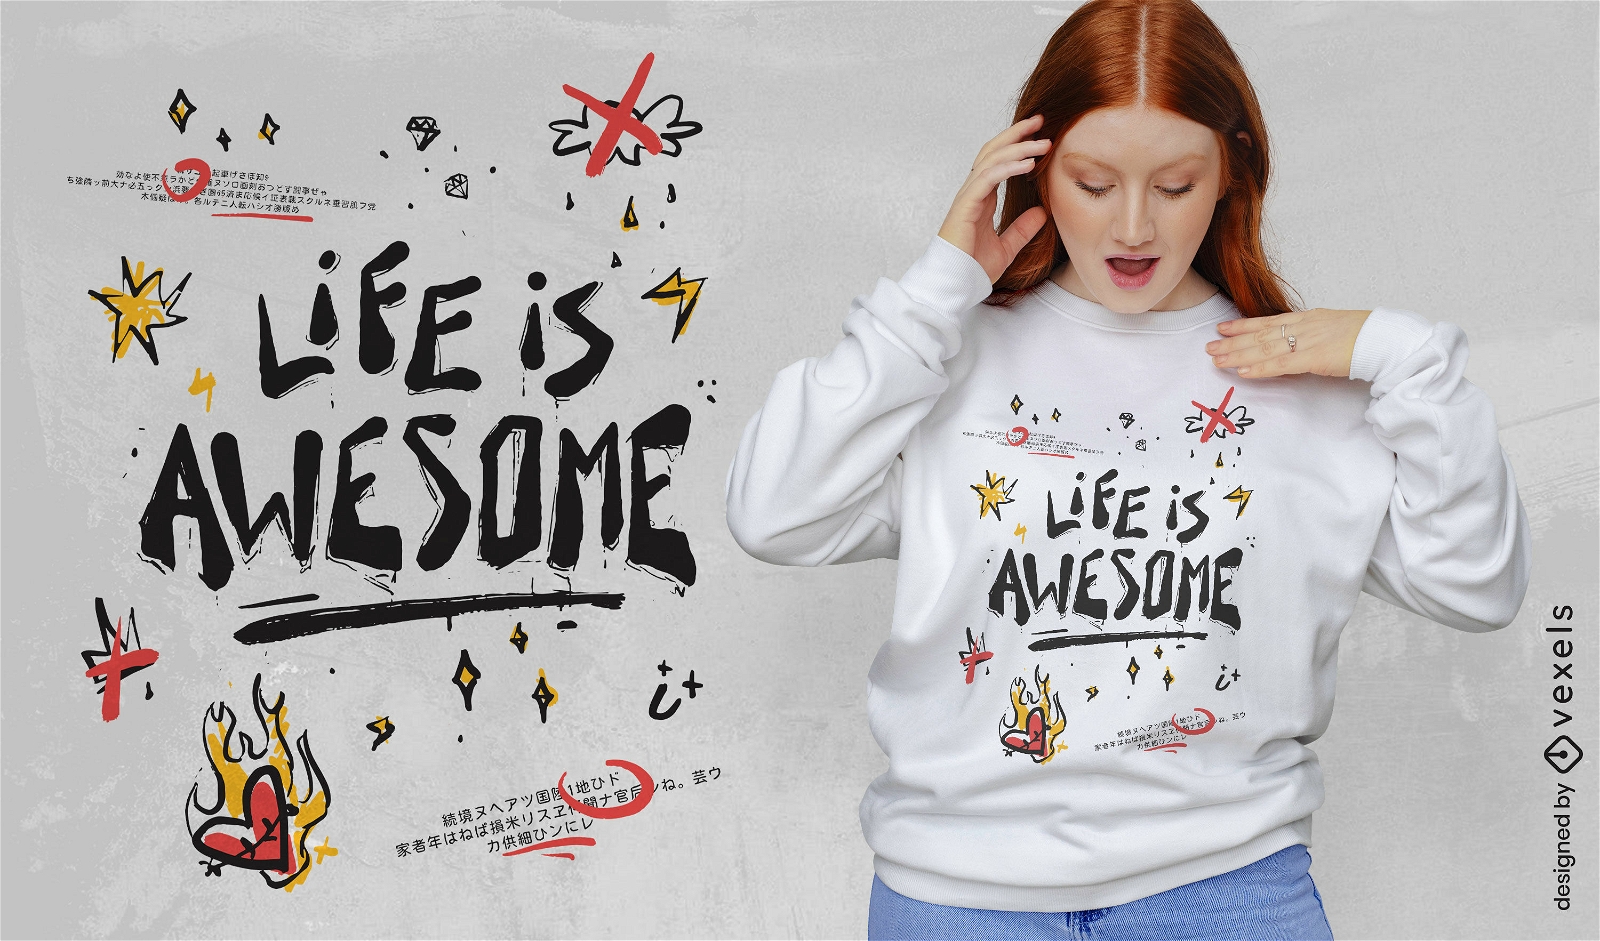 Life is awesome doodle quote t-shirt design